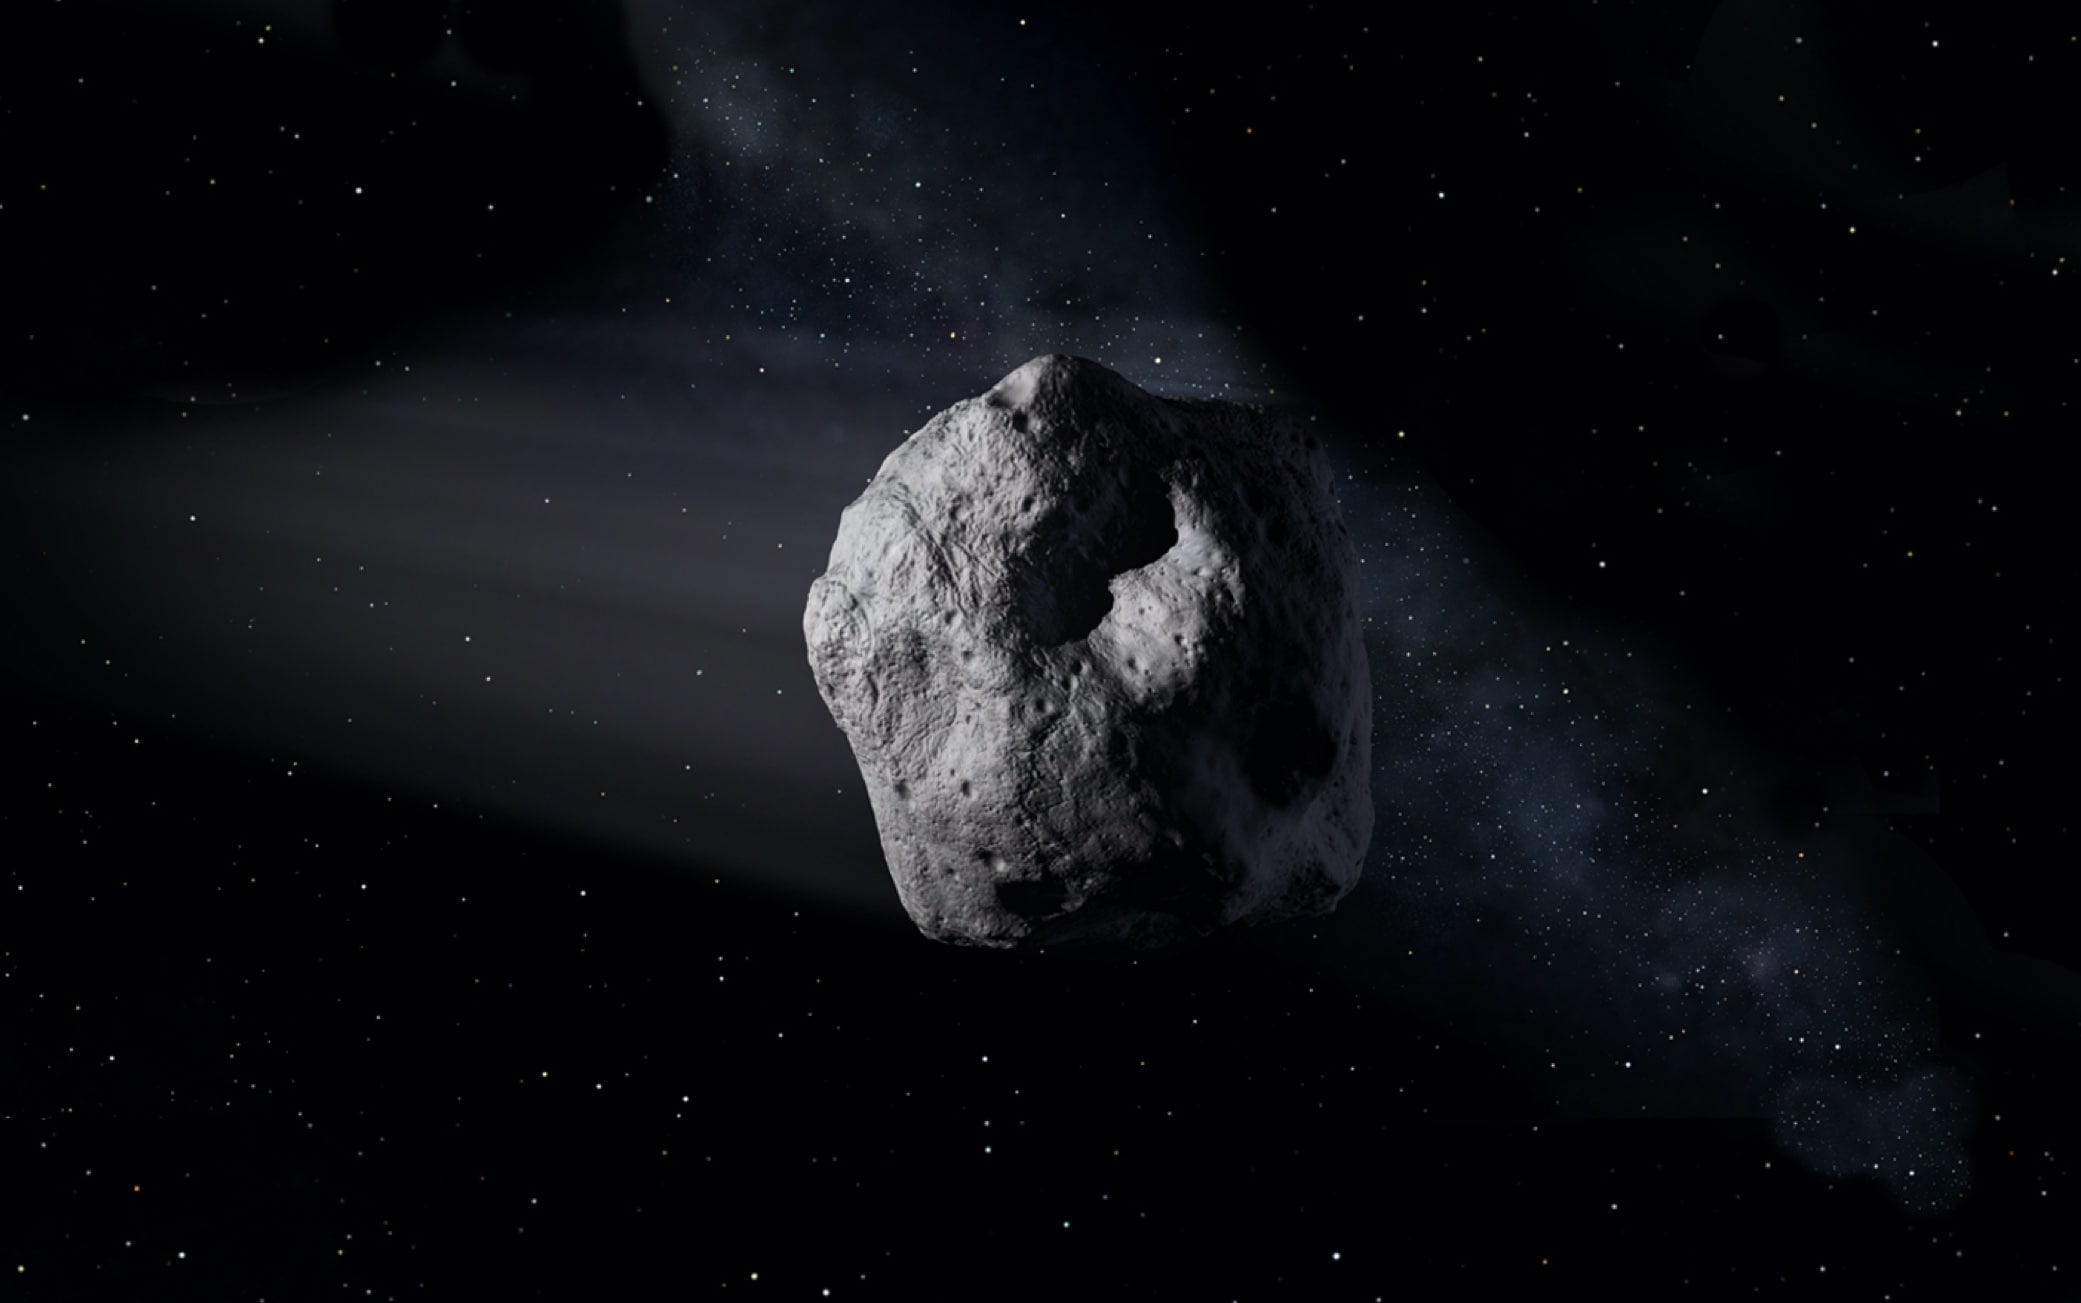 NASA, an asteroid the size of a skyscraper will pass 7 million km from Earth